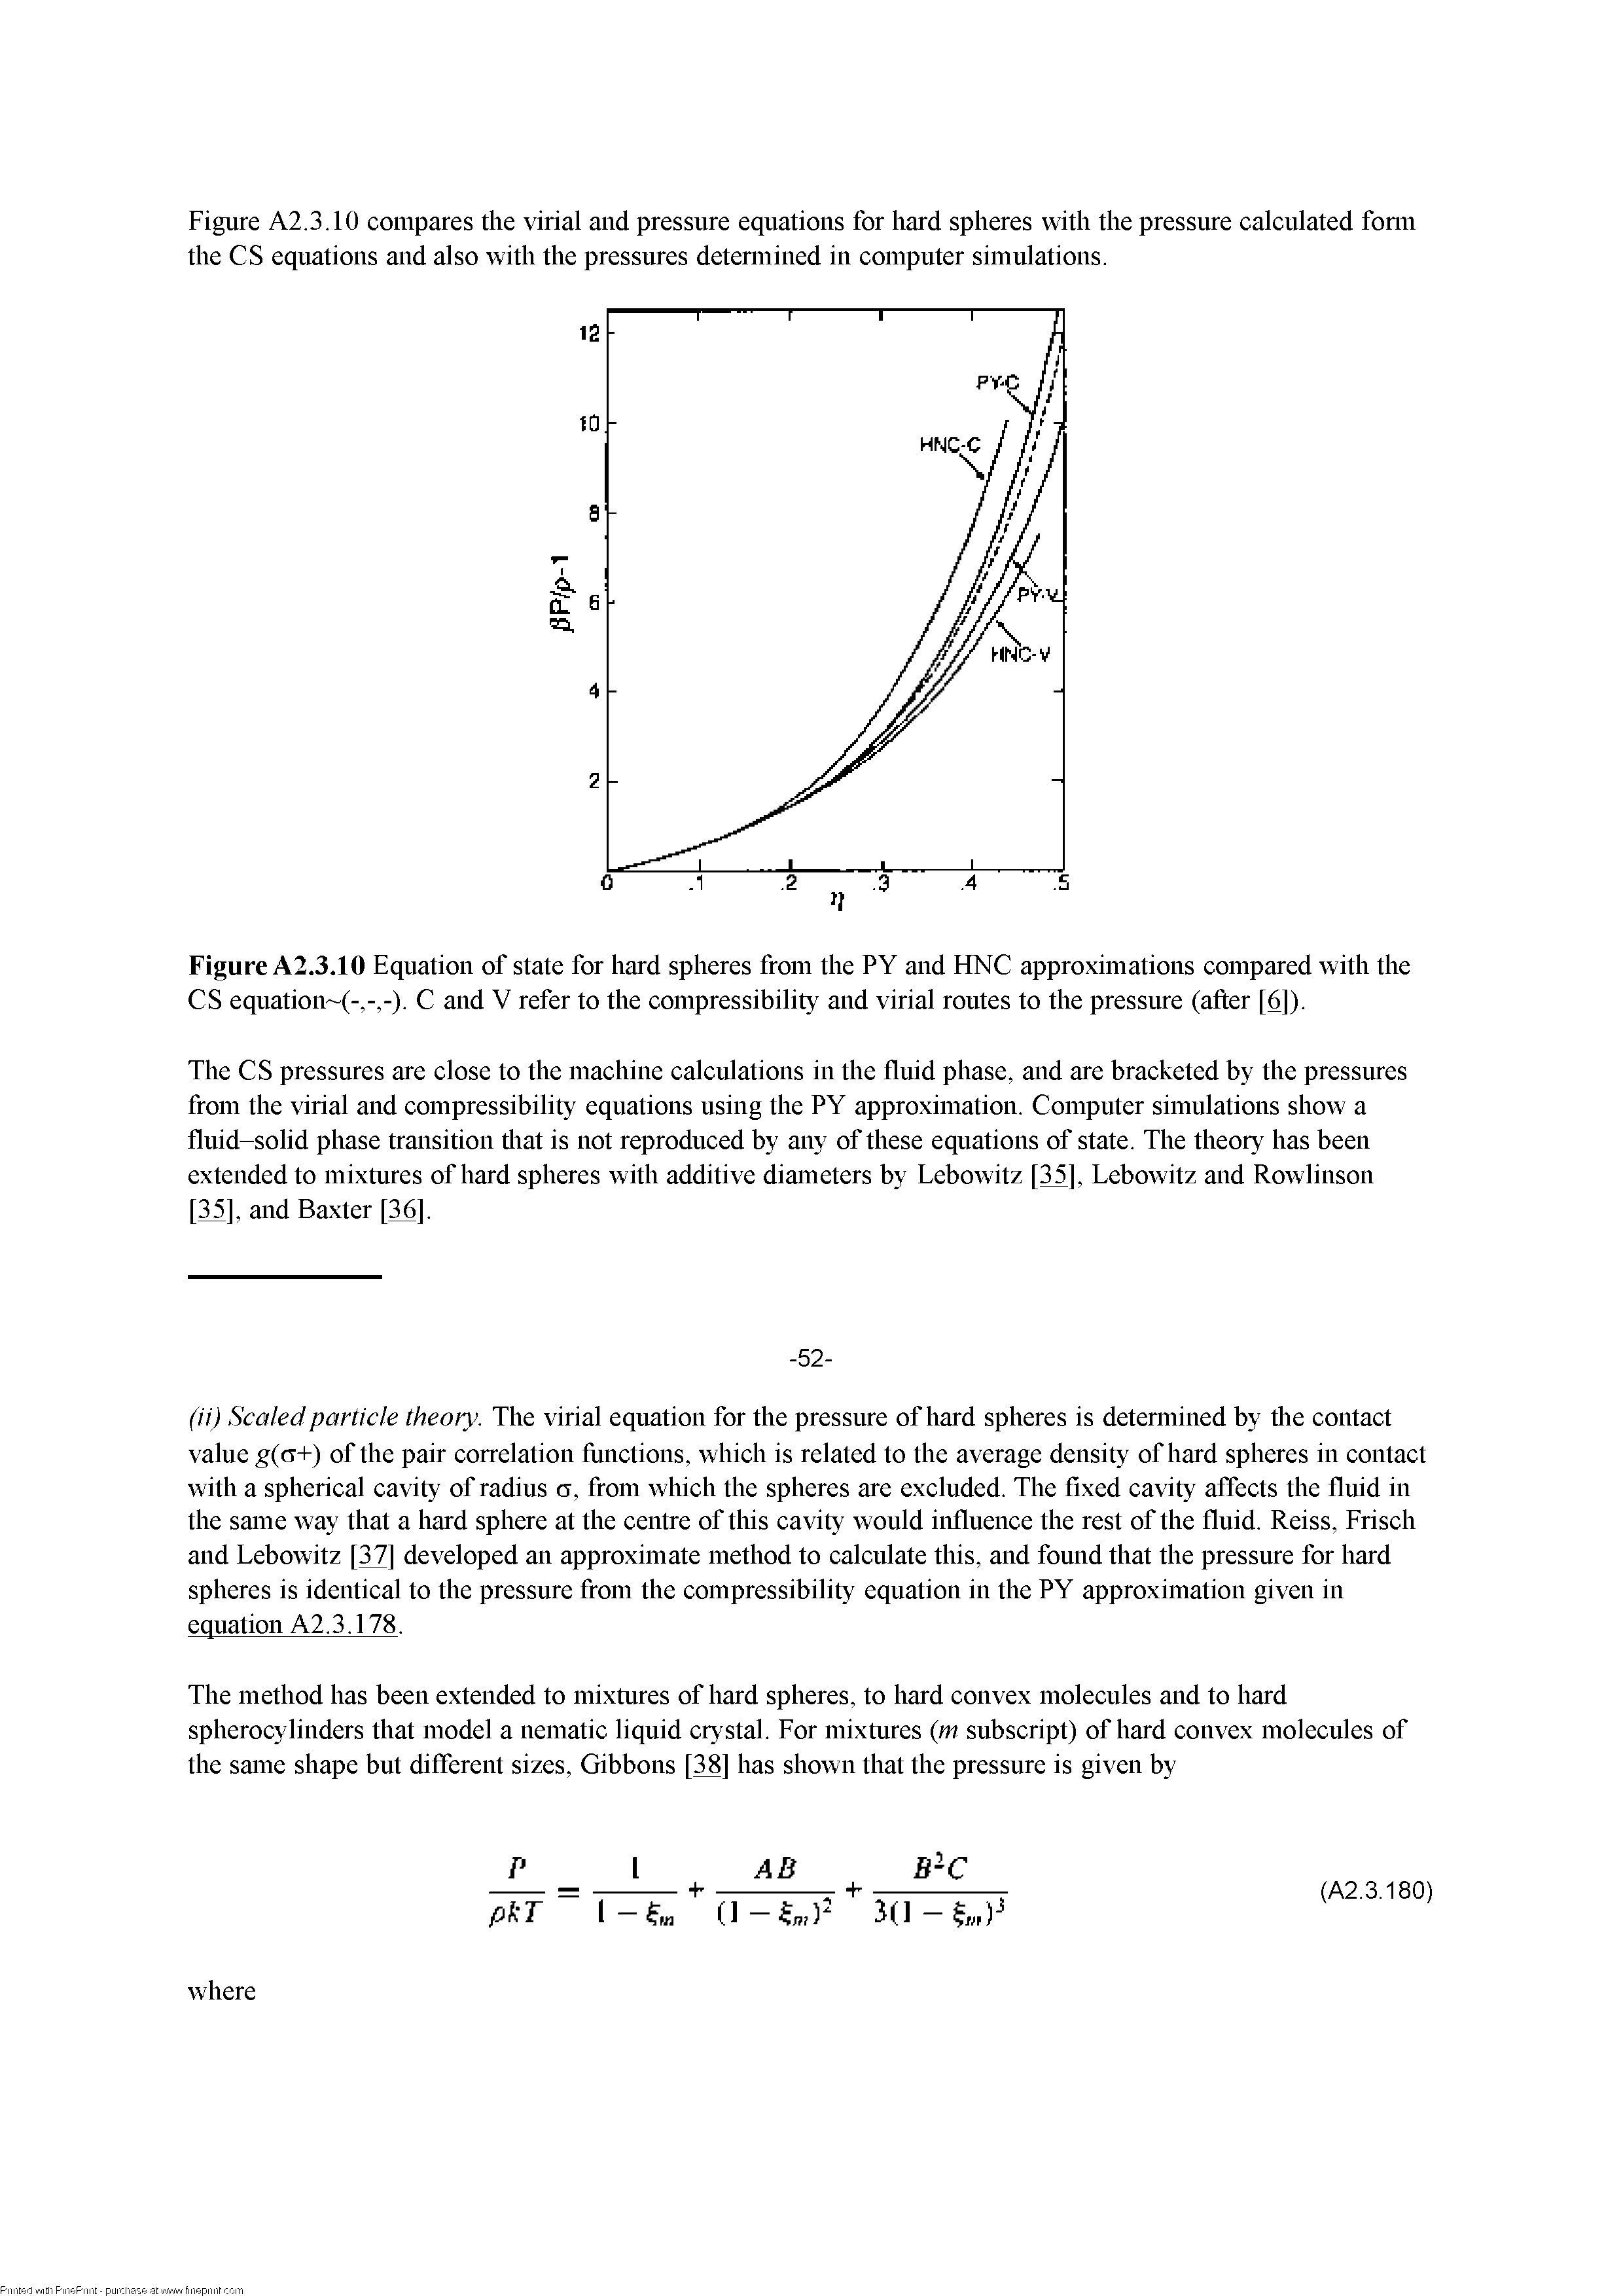 Figure A2.3.10 Equation of state for hard spheres from the PY and FfNC approximations compared with the CS equation (-,-,-). C and V refer to the compressibility and virial routes to the pressure (after [6]).